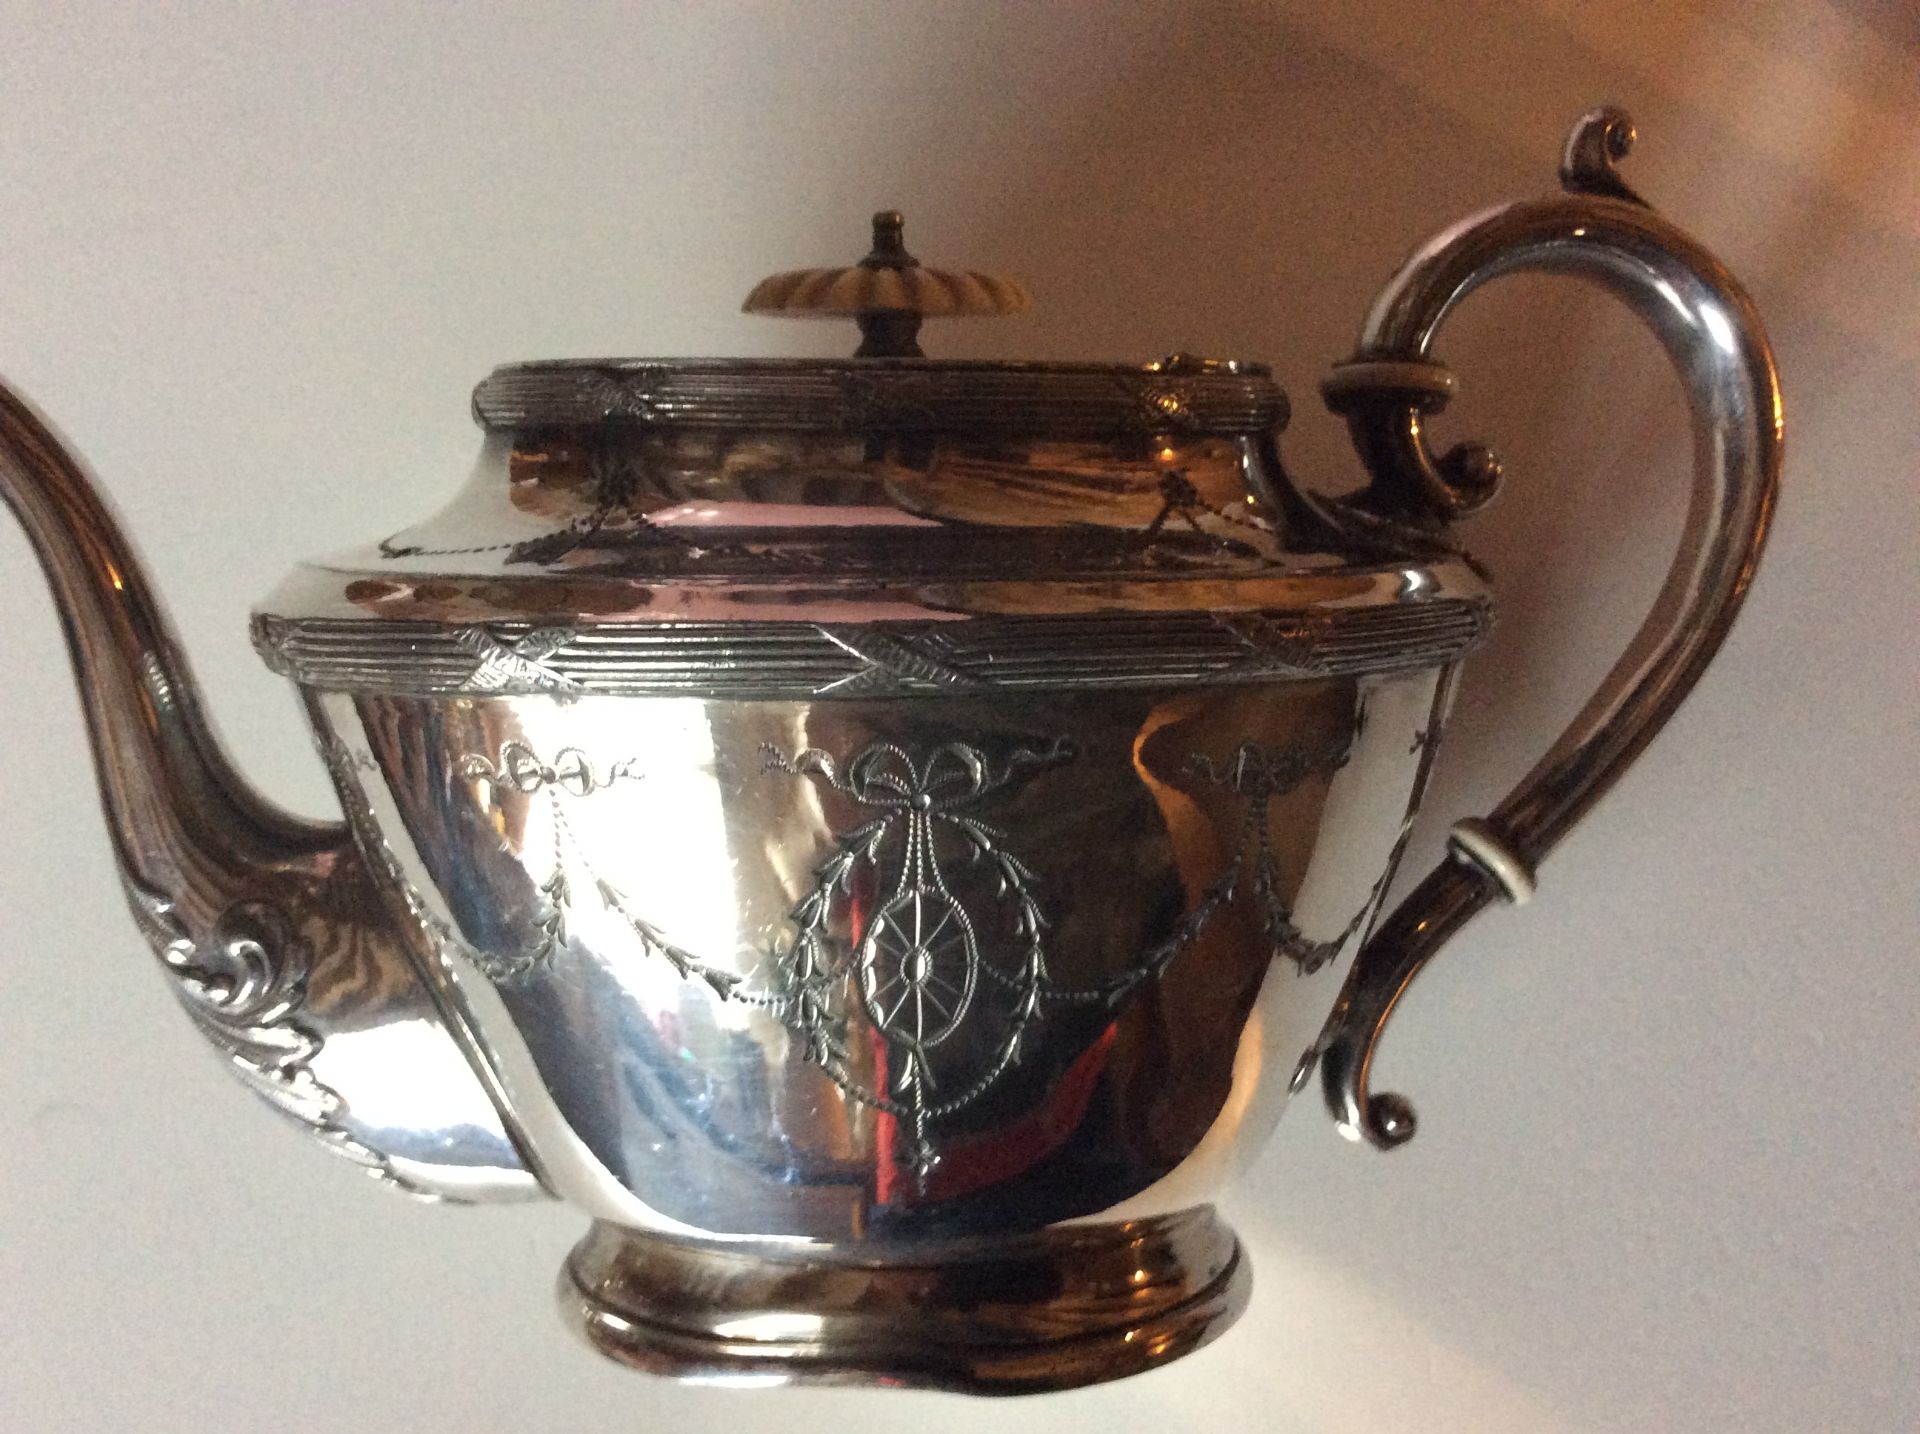 Antique highly decorative English tea pot silver plated - Image 4 of 10